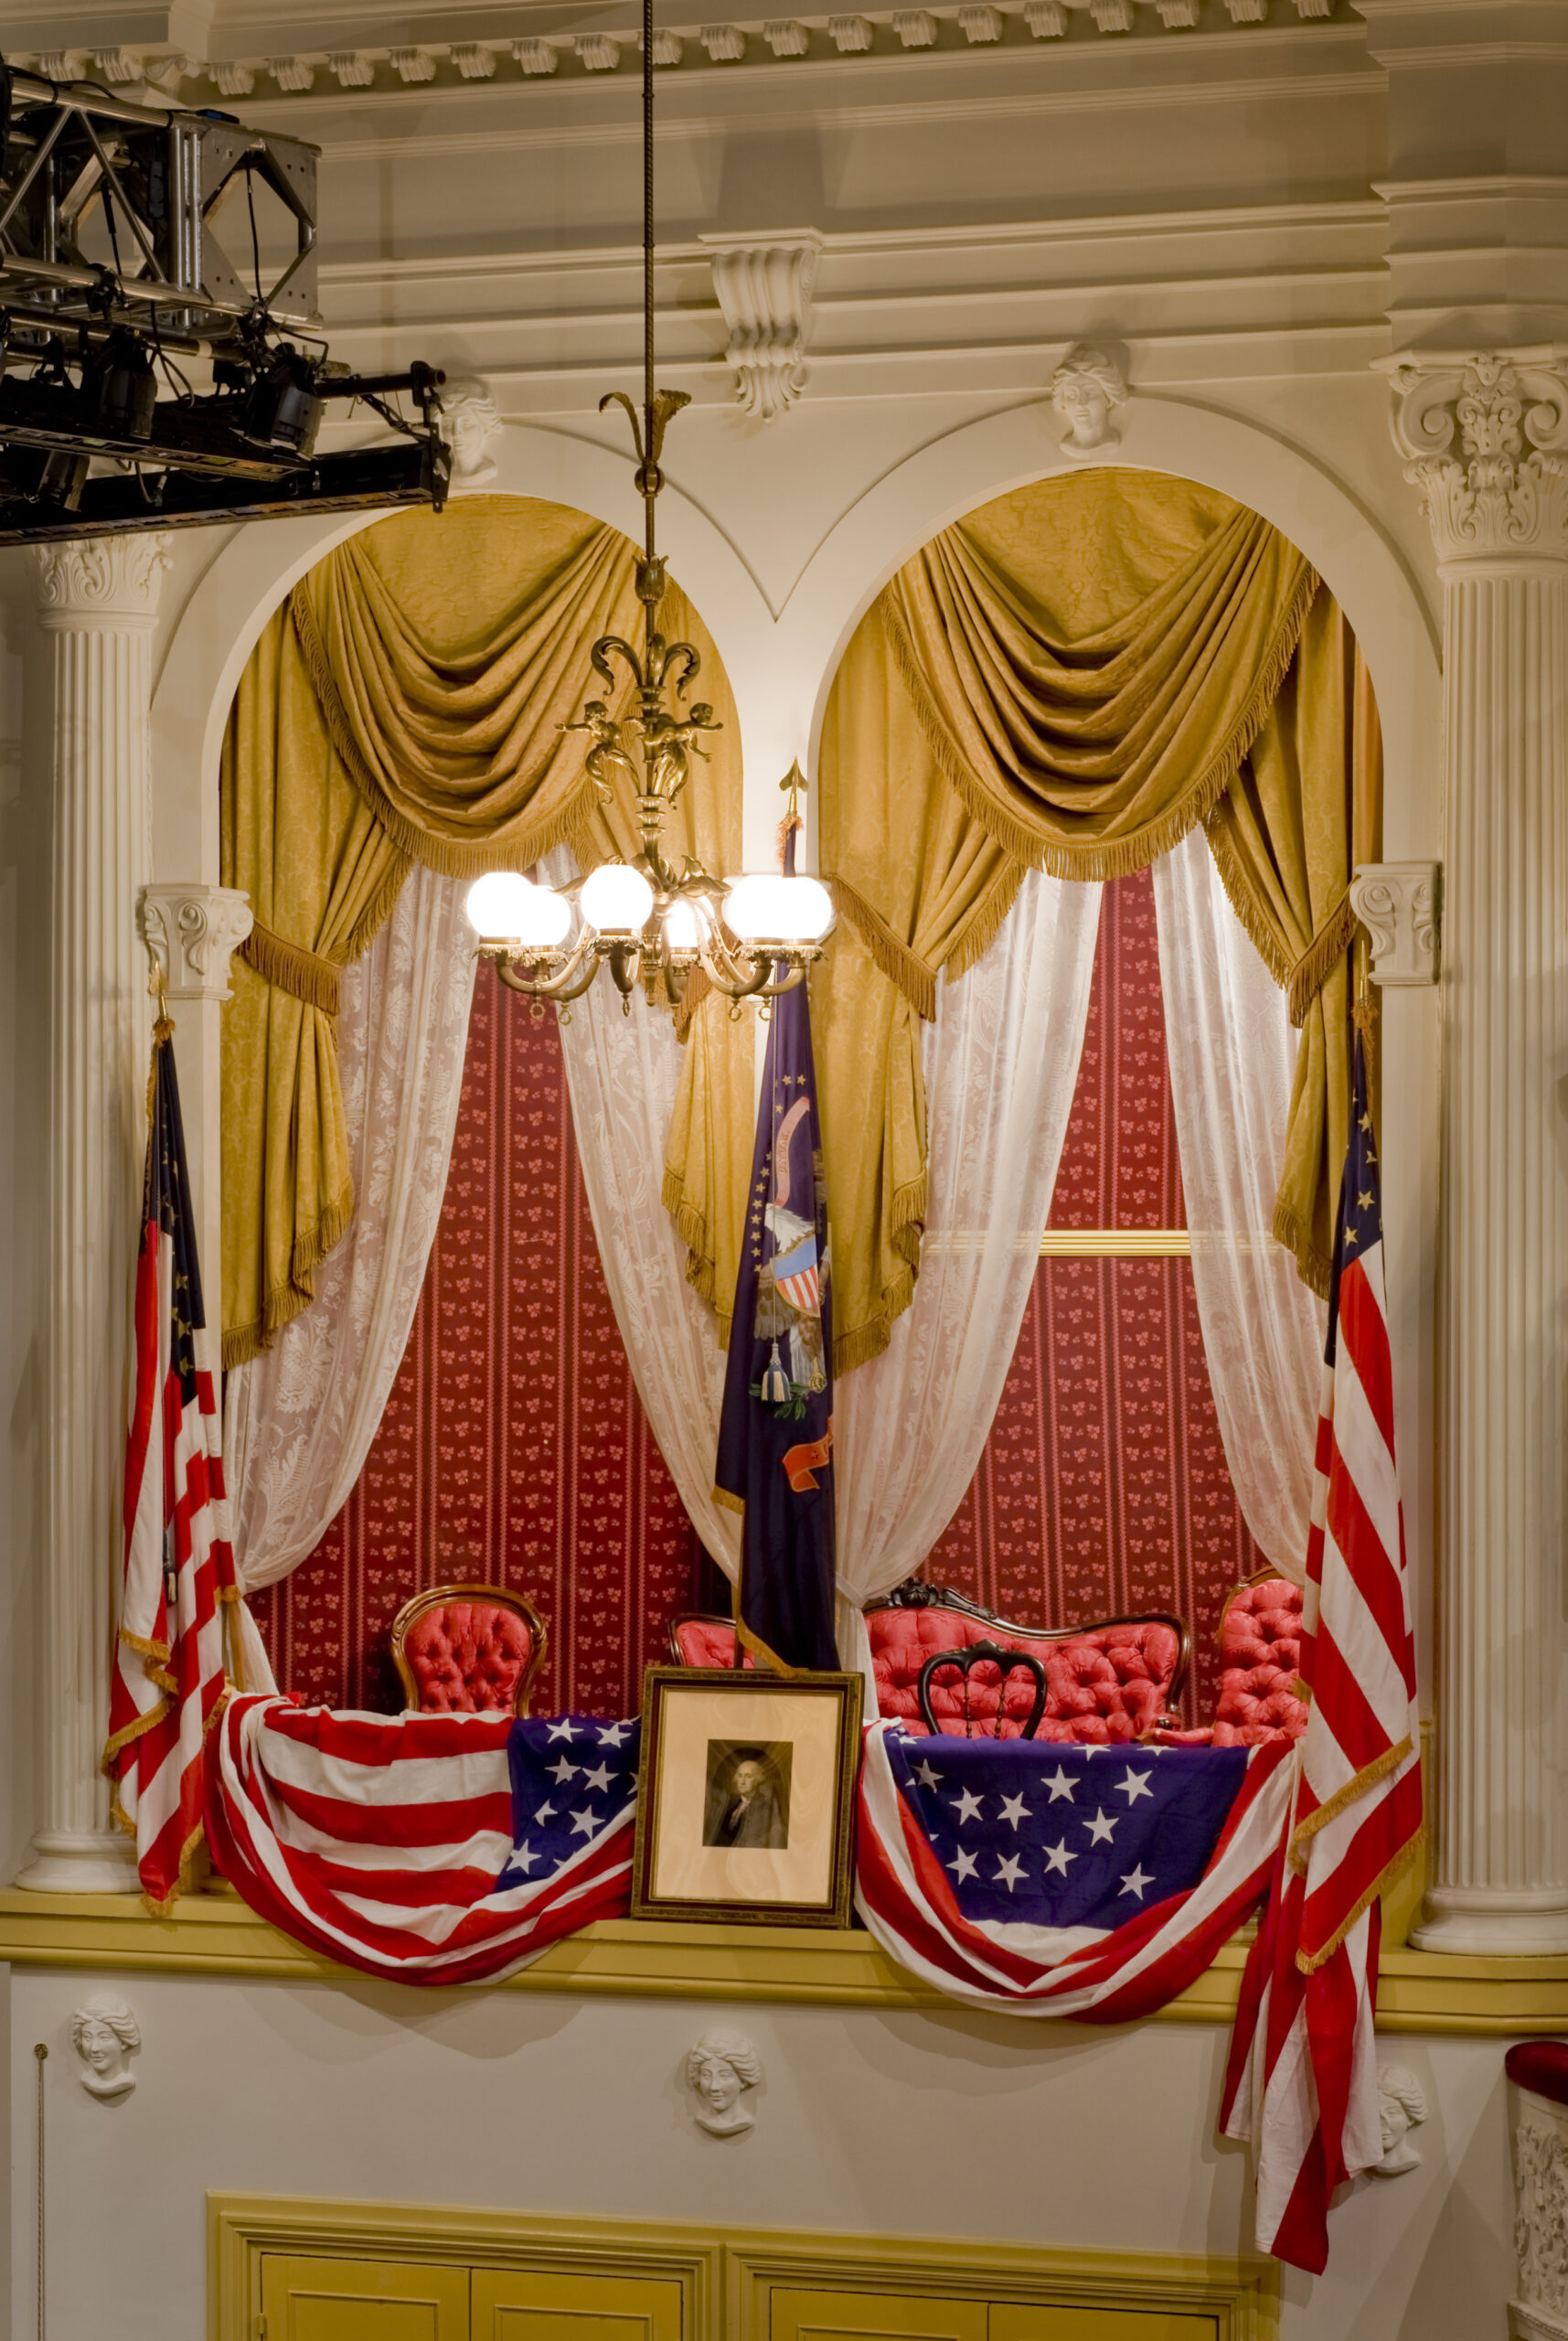 The President’s Box at Ford’s Theatre with American flags on either side, a picture of George Washington in the center and American flag bunting draped over the box. The interior of the box has red patterned wallpaper and red upholstered chairs and a couch. The box is framed by gold curtains with white lace curtains underneath them.